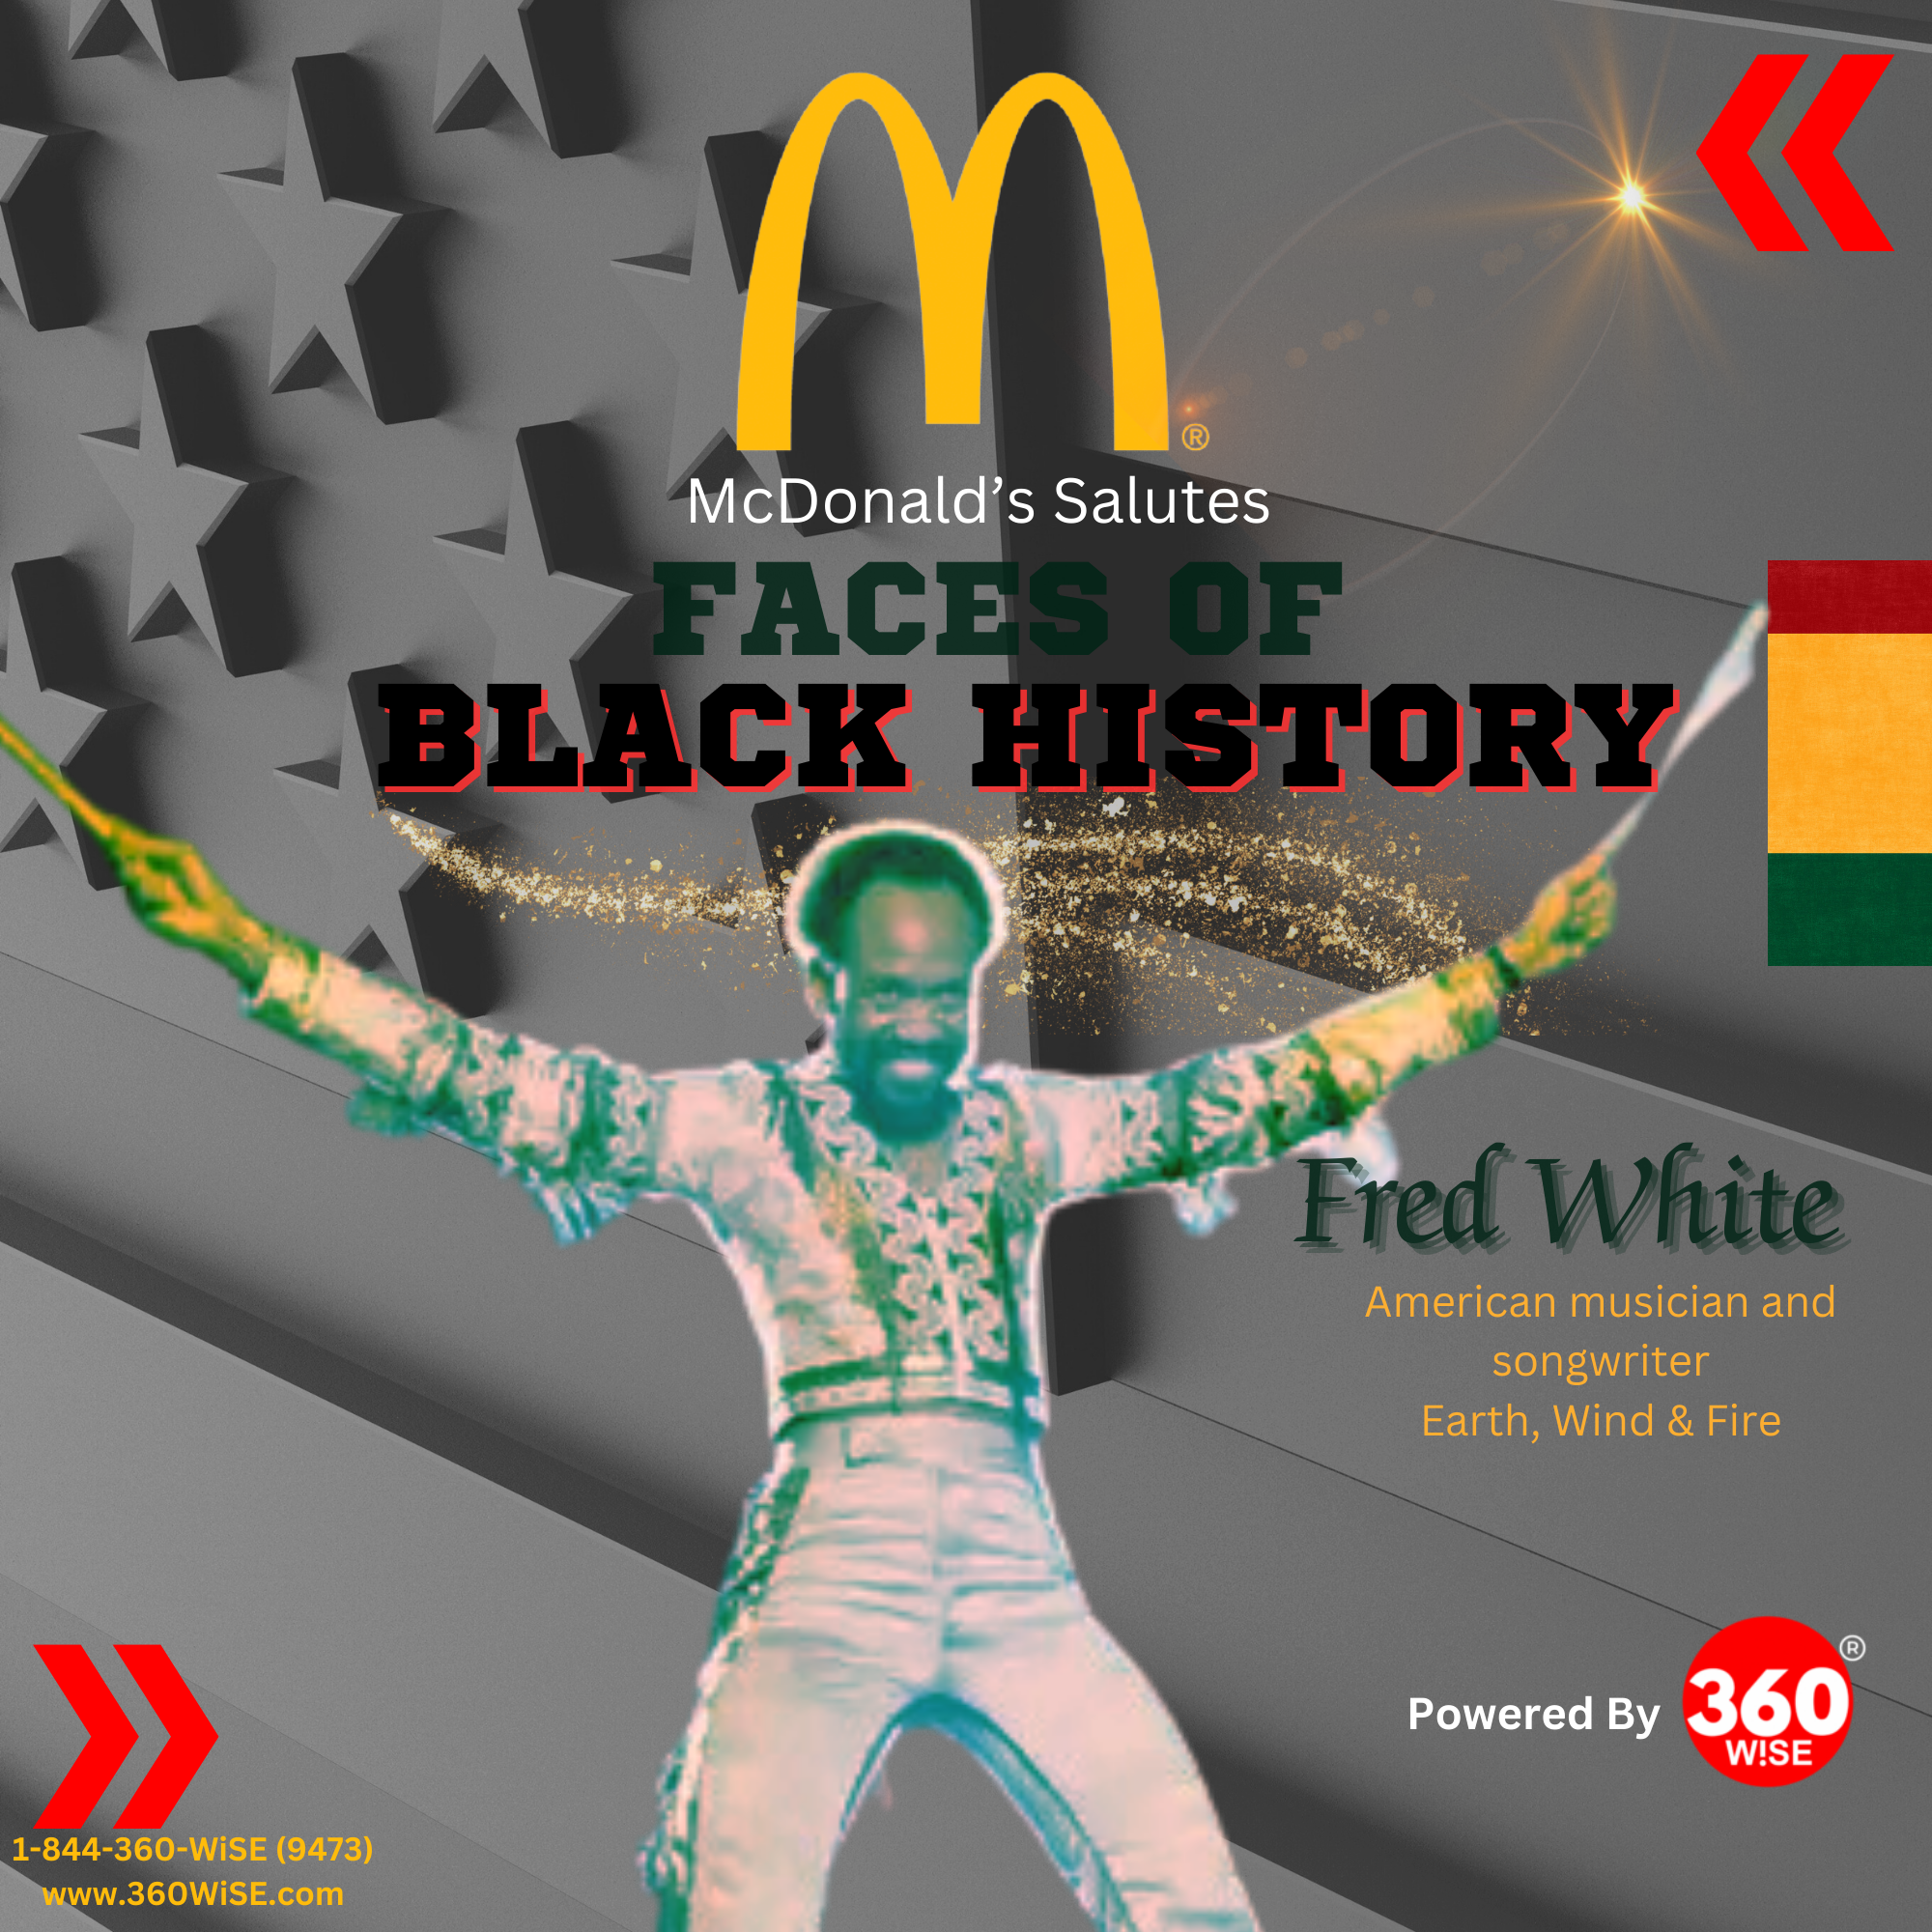 McDonald's Faces of Black History Salutes Fred White. Powered by 360WiSE